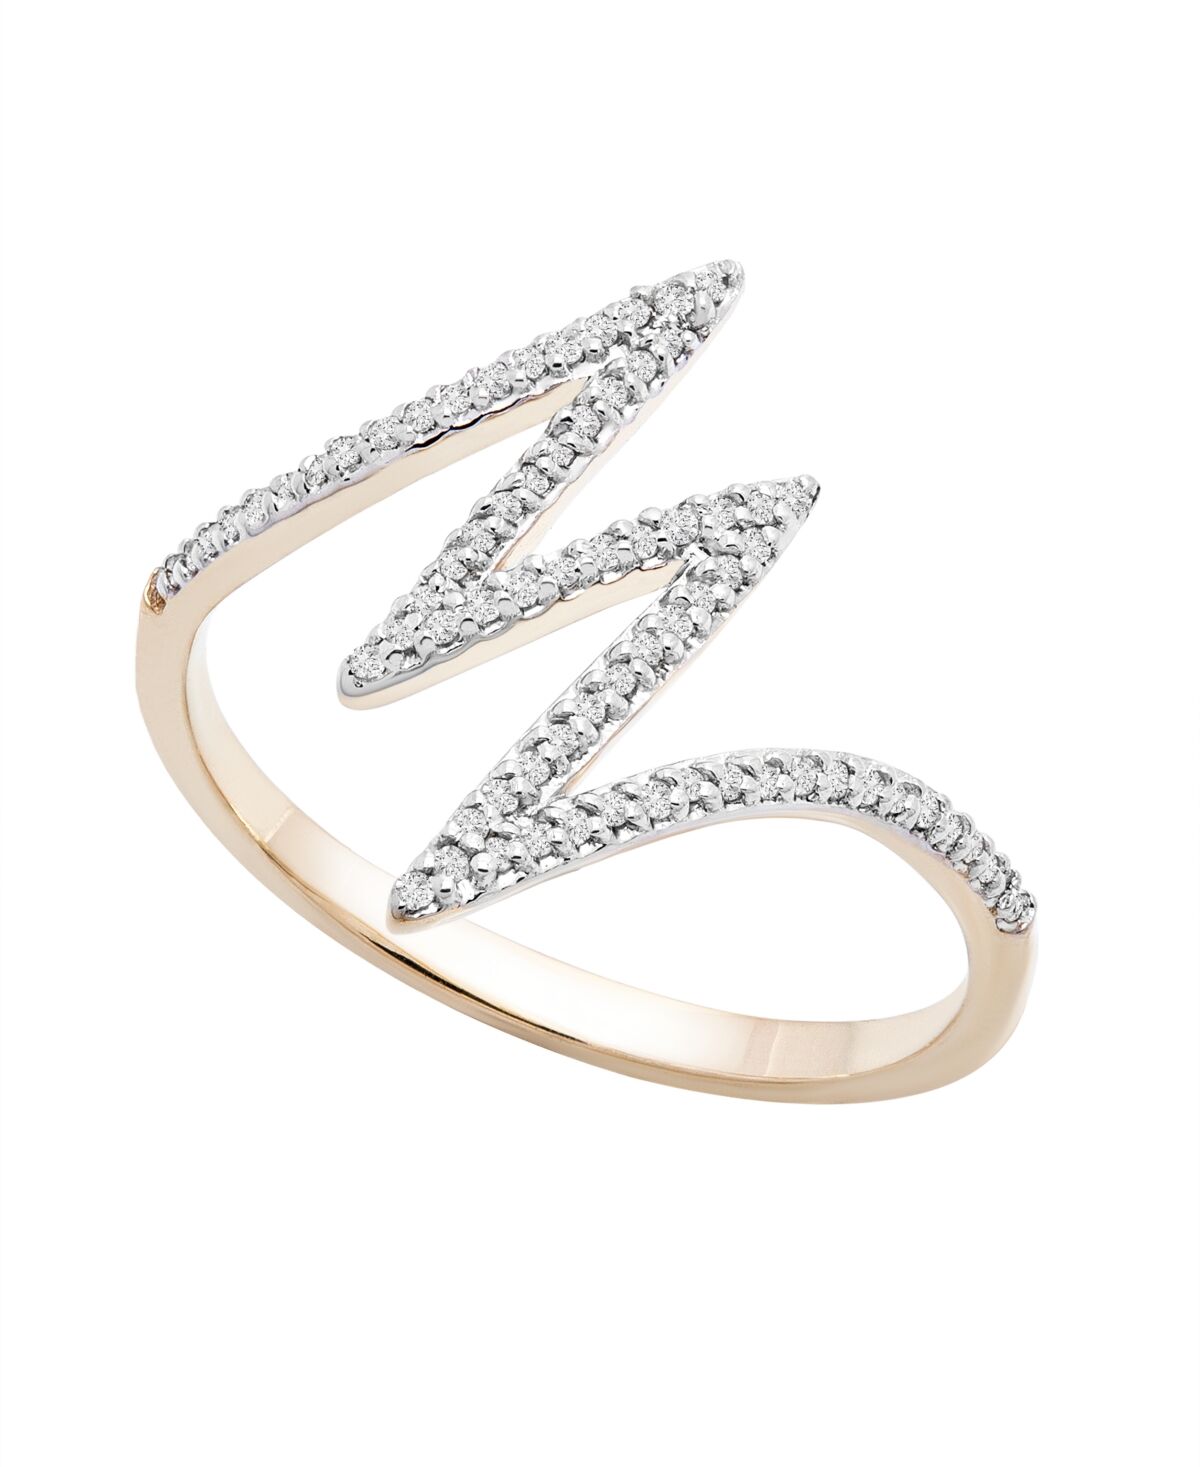 Wrapped Diamond Lightning Bolt Ring (1/6 ct. t.w.) in 10k Gold Or White Gold, Created for Macy's - Yellow Gold